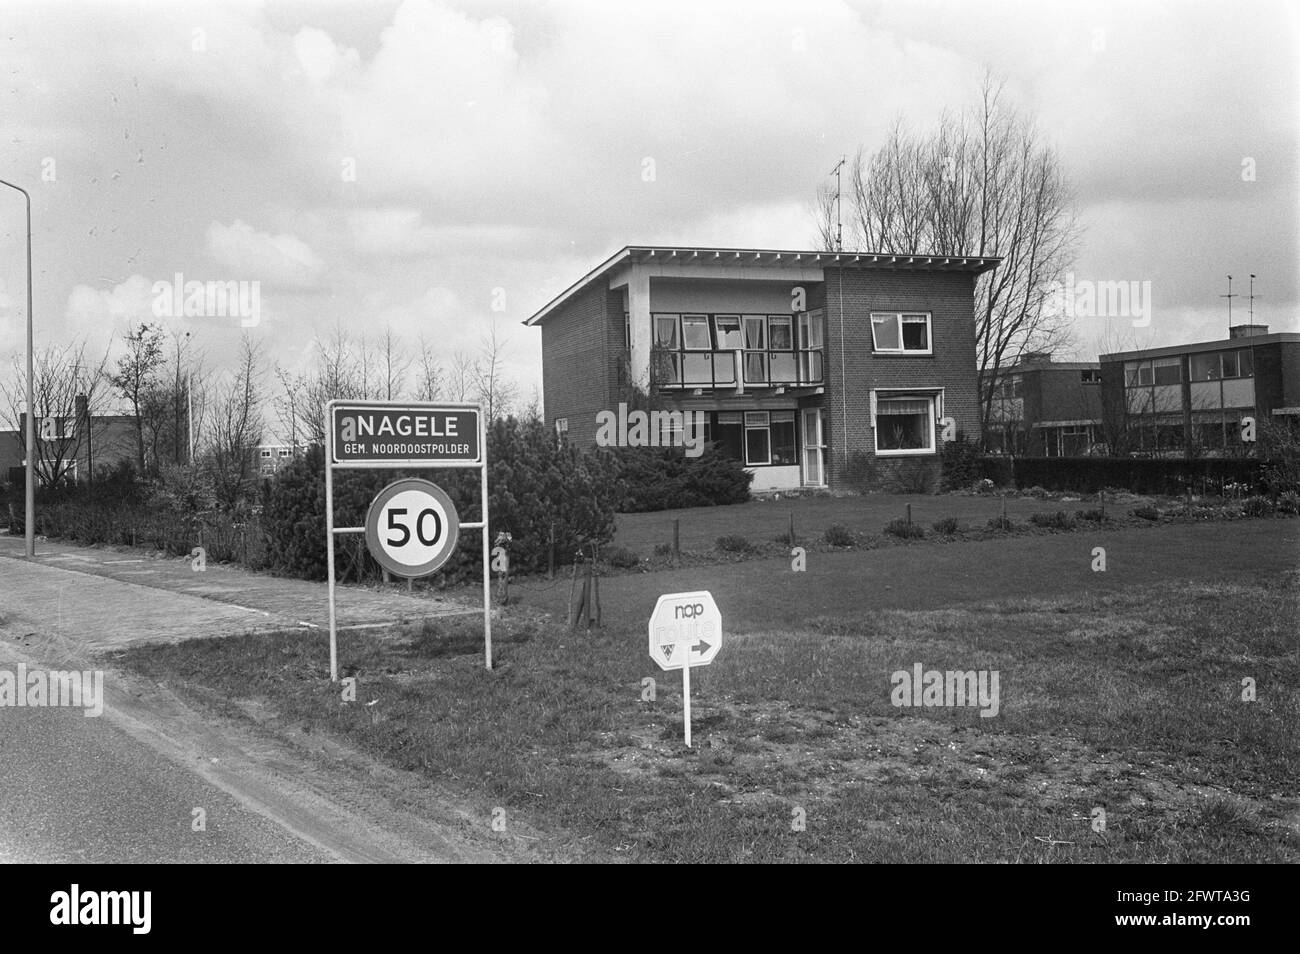 Noord Oost Polder sign village Nagele, April 17, 1969, signs, villages, The Netherlands, 20th century press agency photo, news to remember, documentary, historic photography 1945-1990, visual stories, human history of the Twentieth Century, capturing moments in time Stock Photo